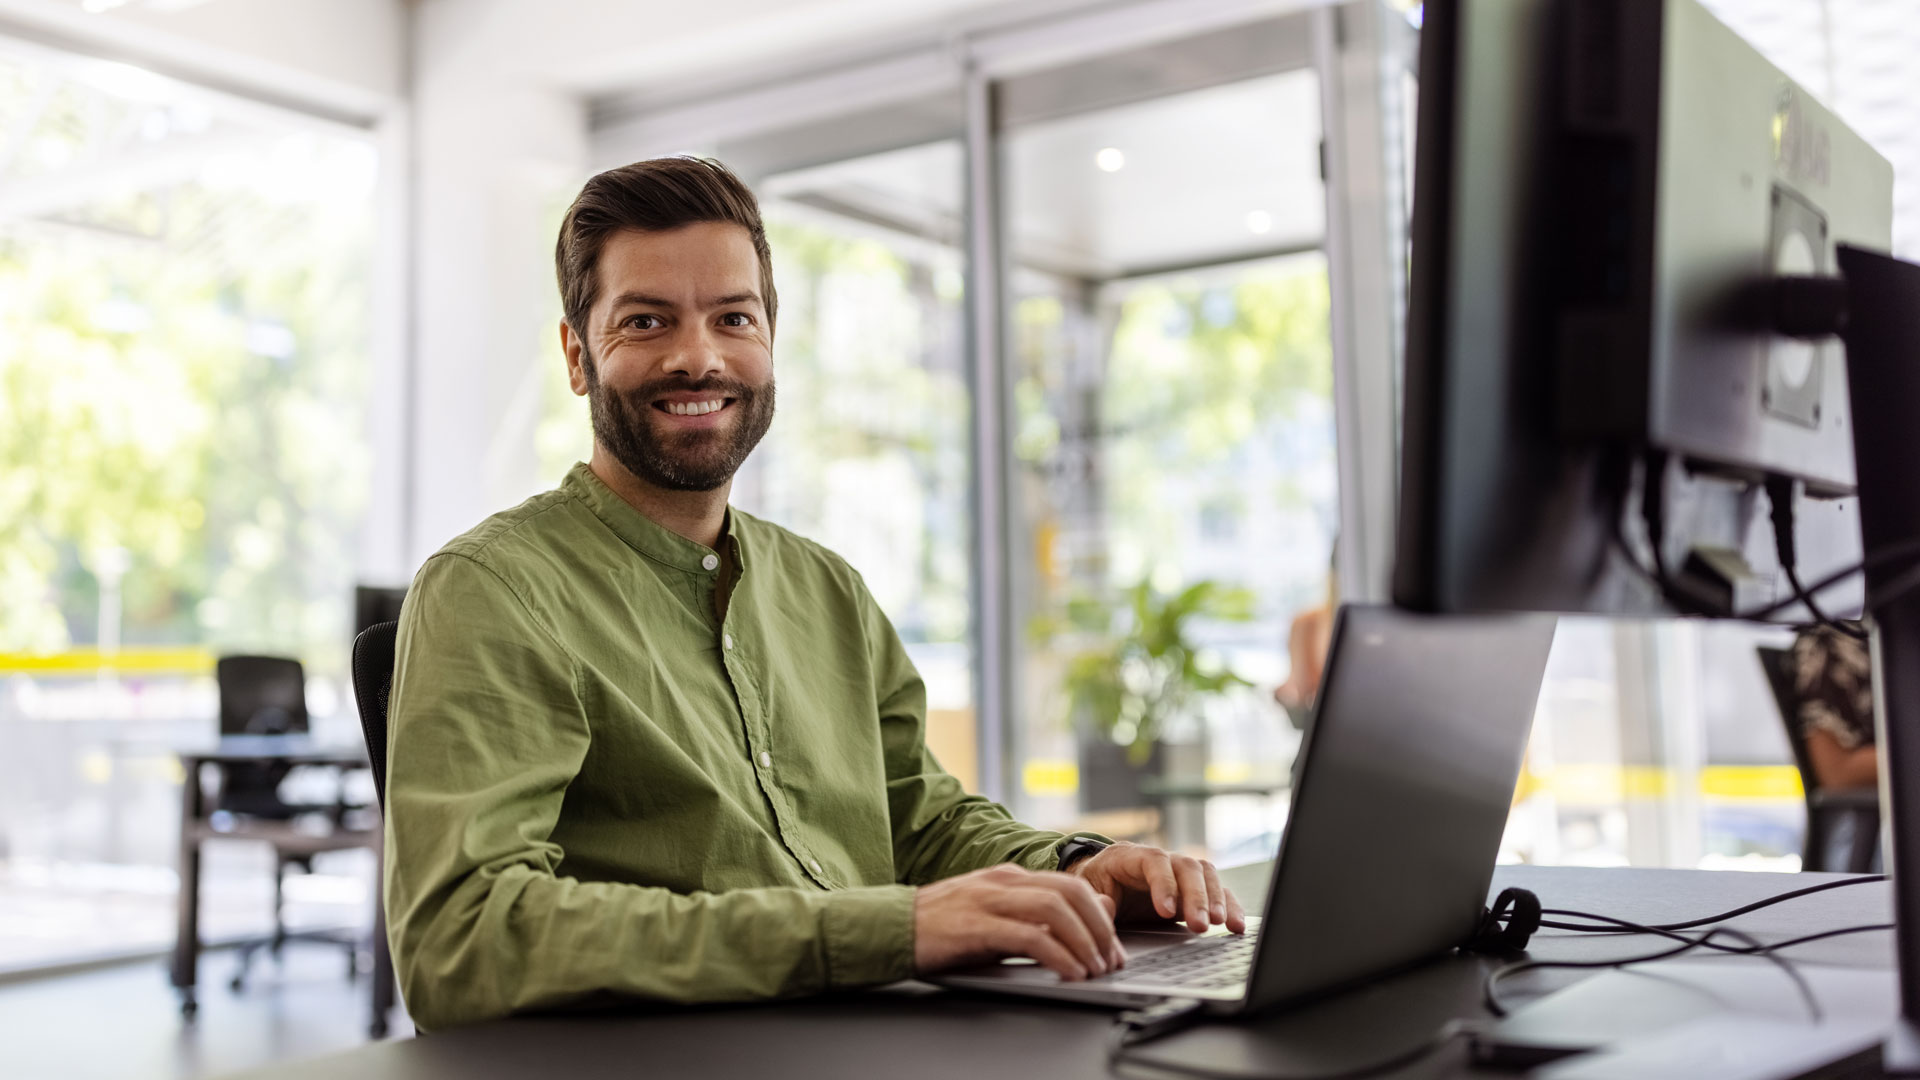 Man at work wearing a green shirt with his laptop smiling at the camera